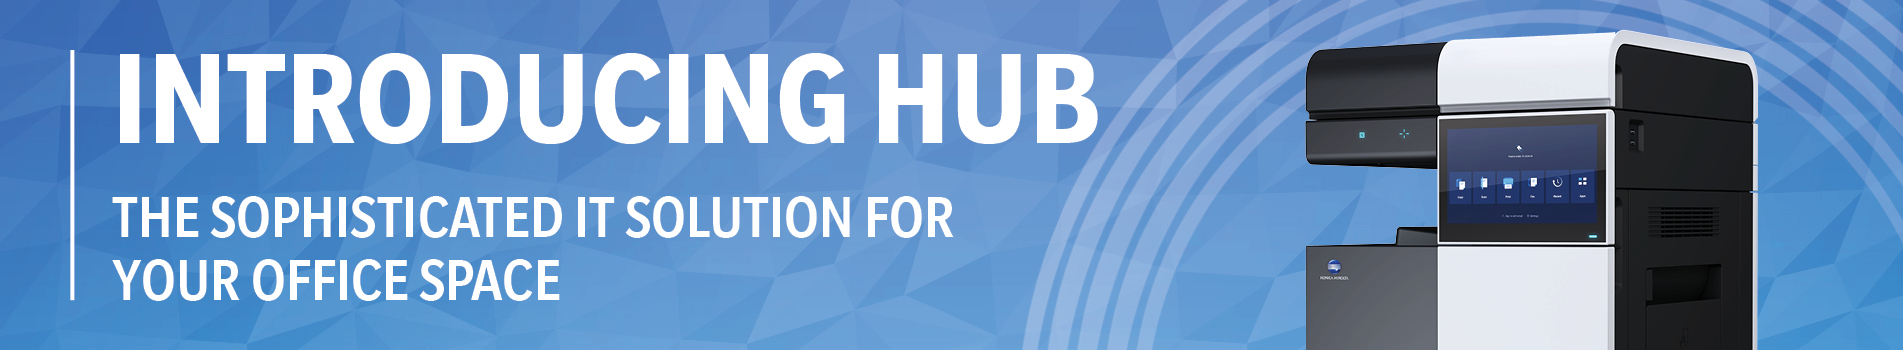 Introducing Hub. The sophisticated IT solution for your office.